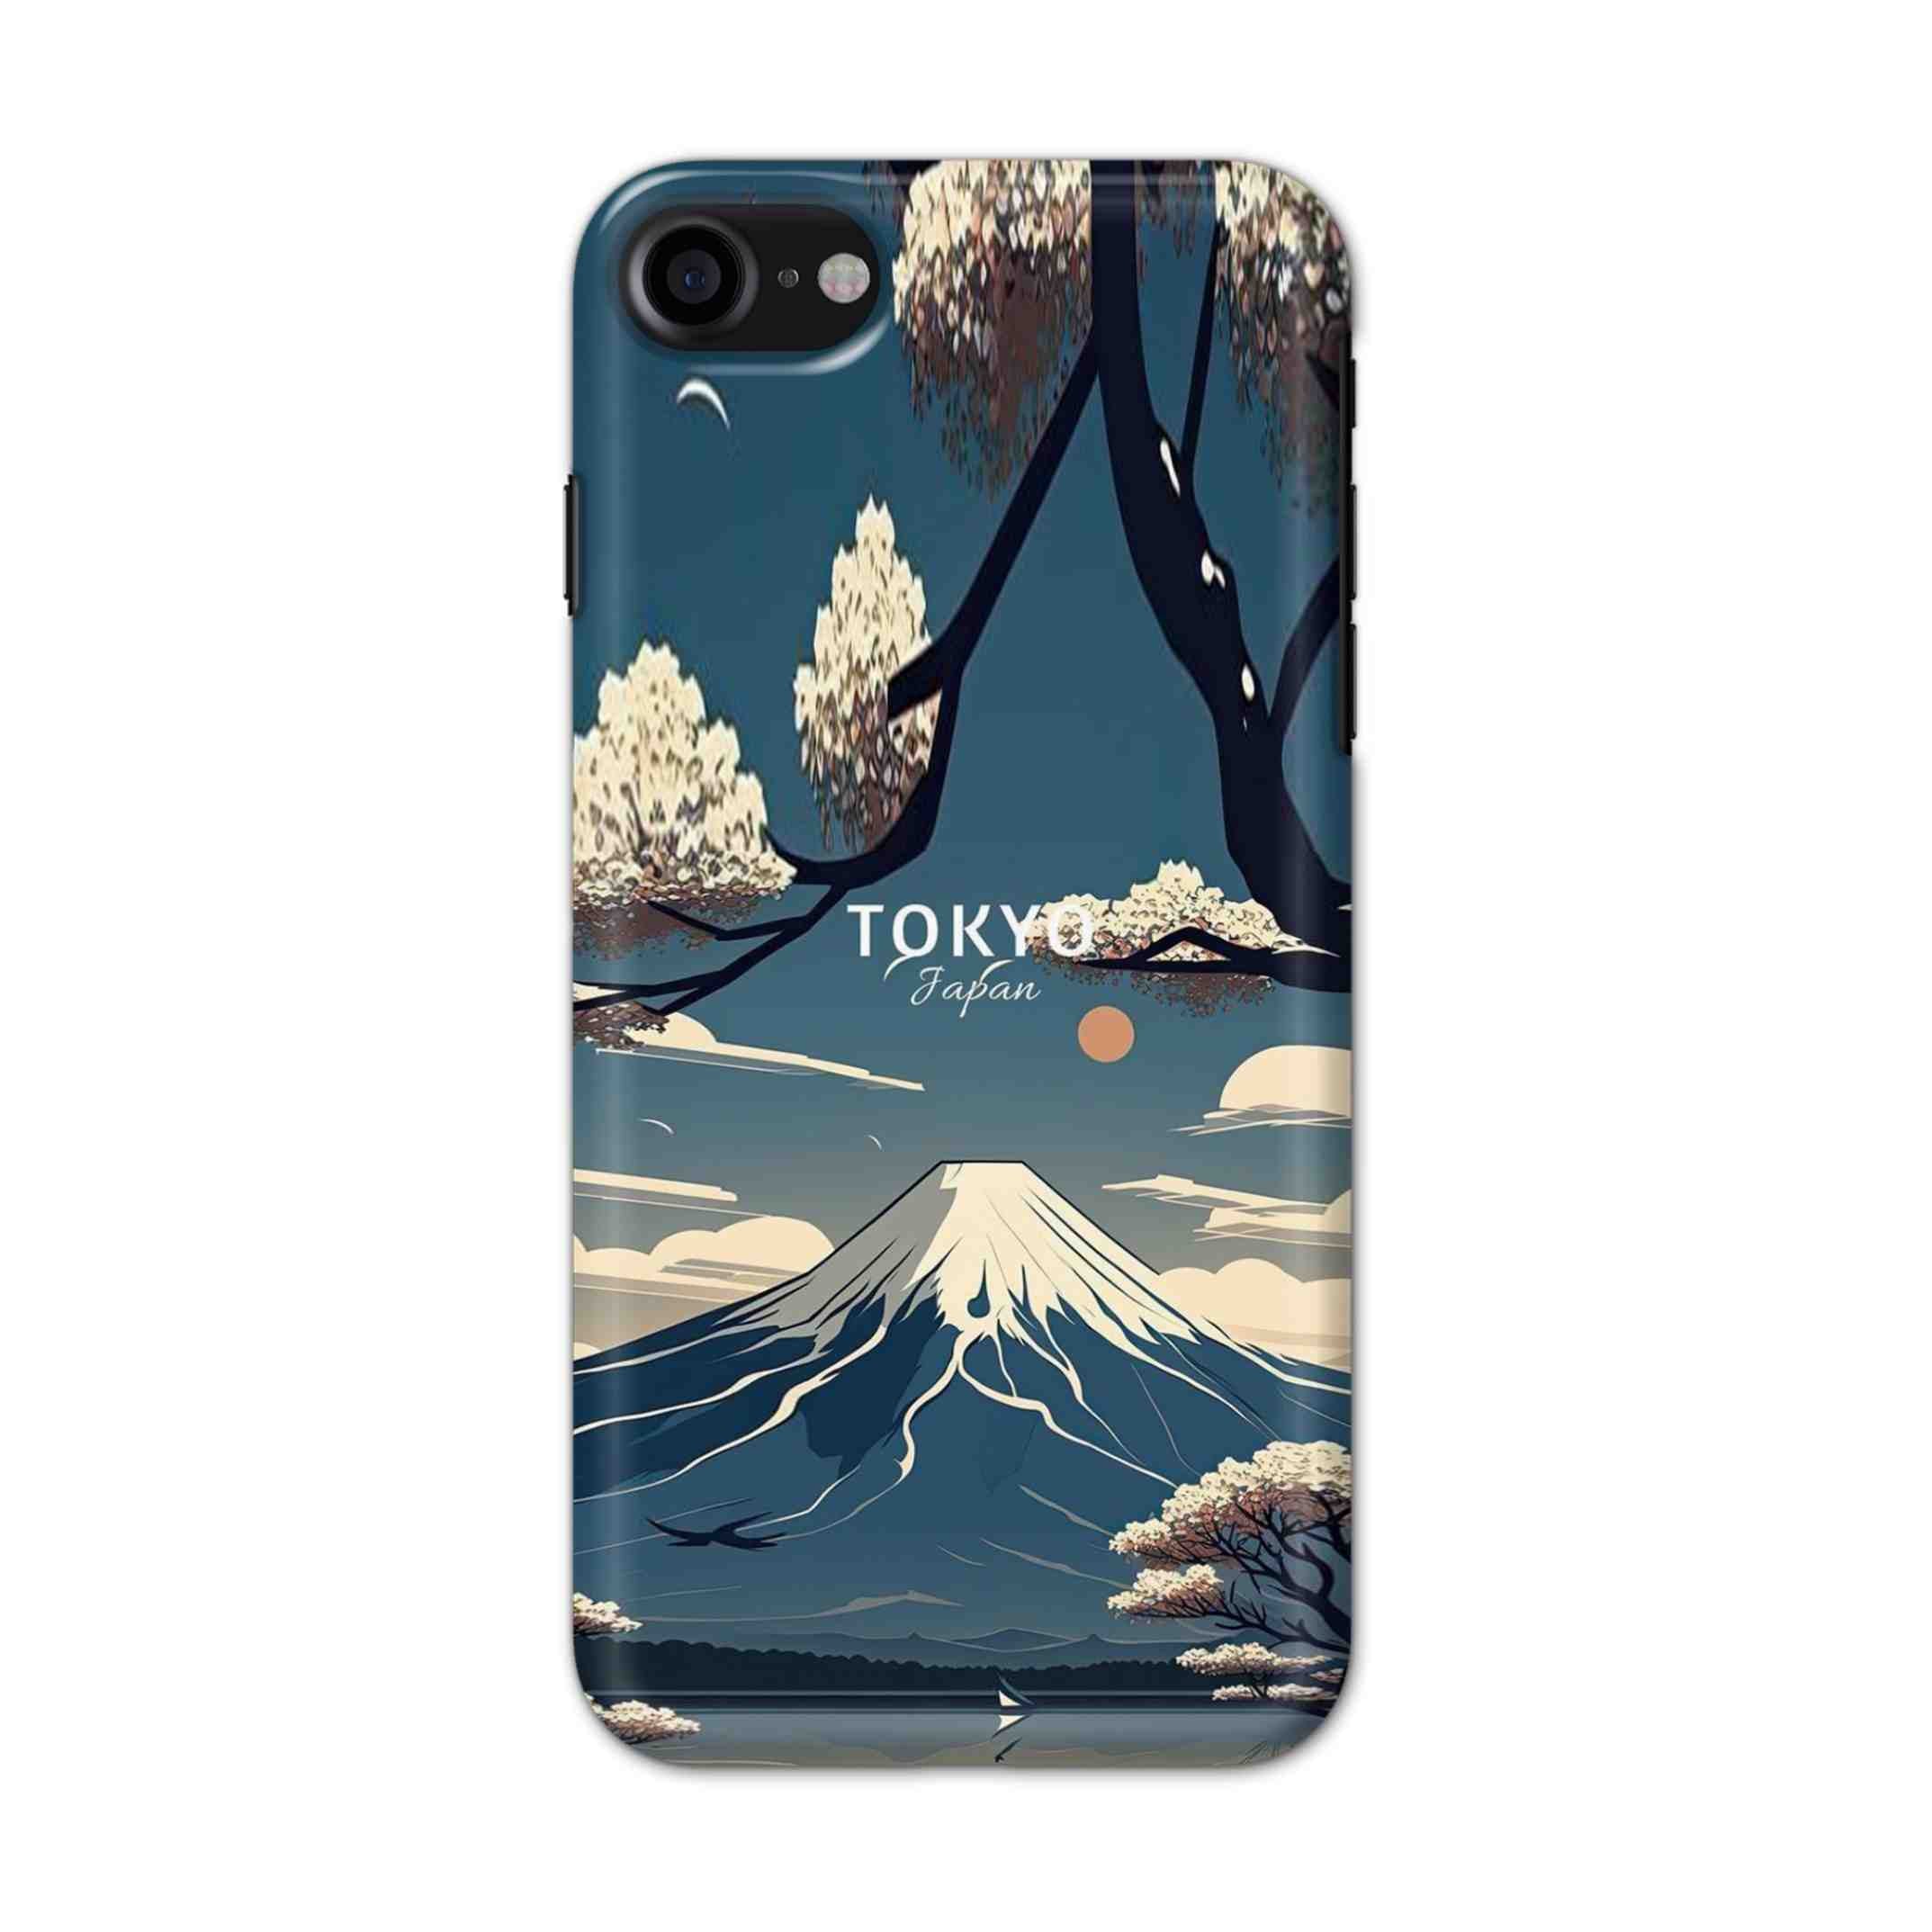 Buy Tokyo Hard Back Mobile Phone Case/Cover For iPhone 7 / 8 Online